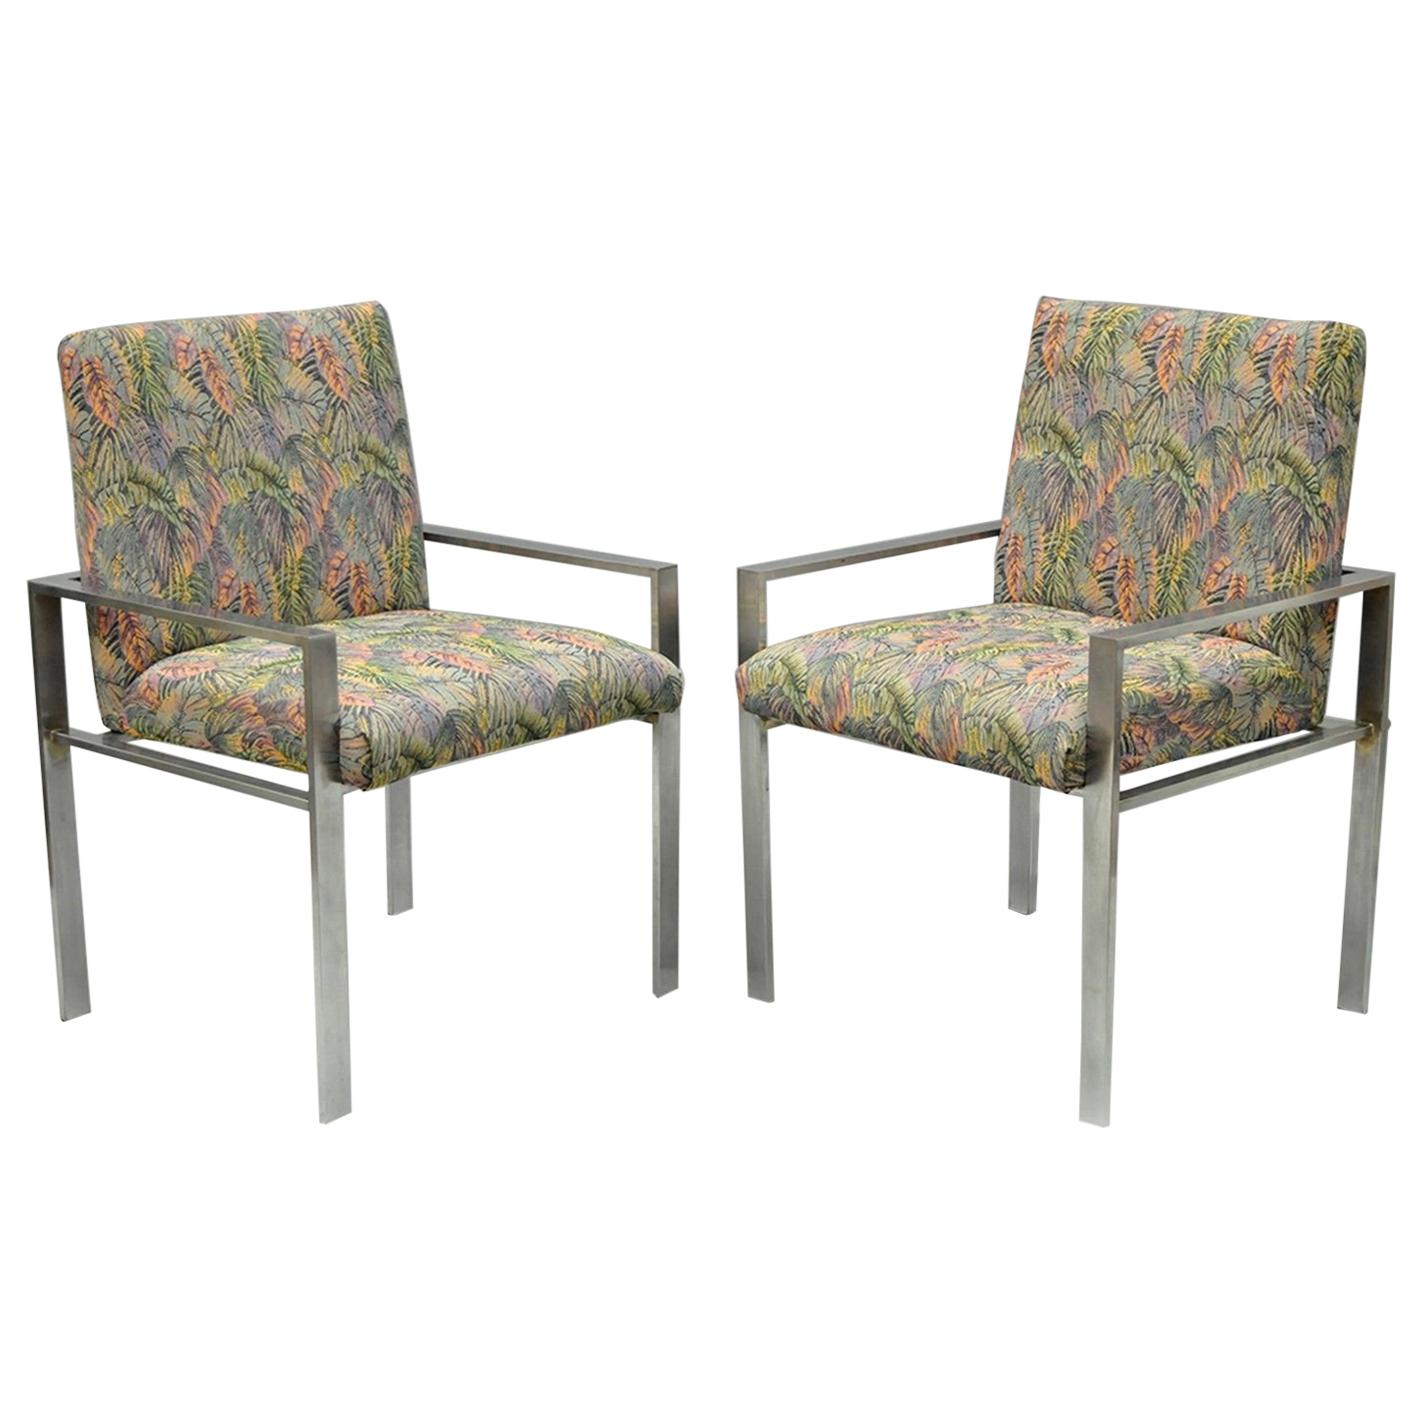 Pair of Harvey Probber Attributed Aluminum Lounge Armchairs, Mid-Century Modern For Sale